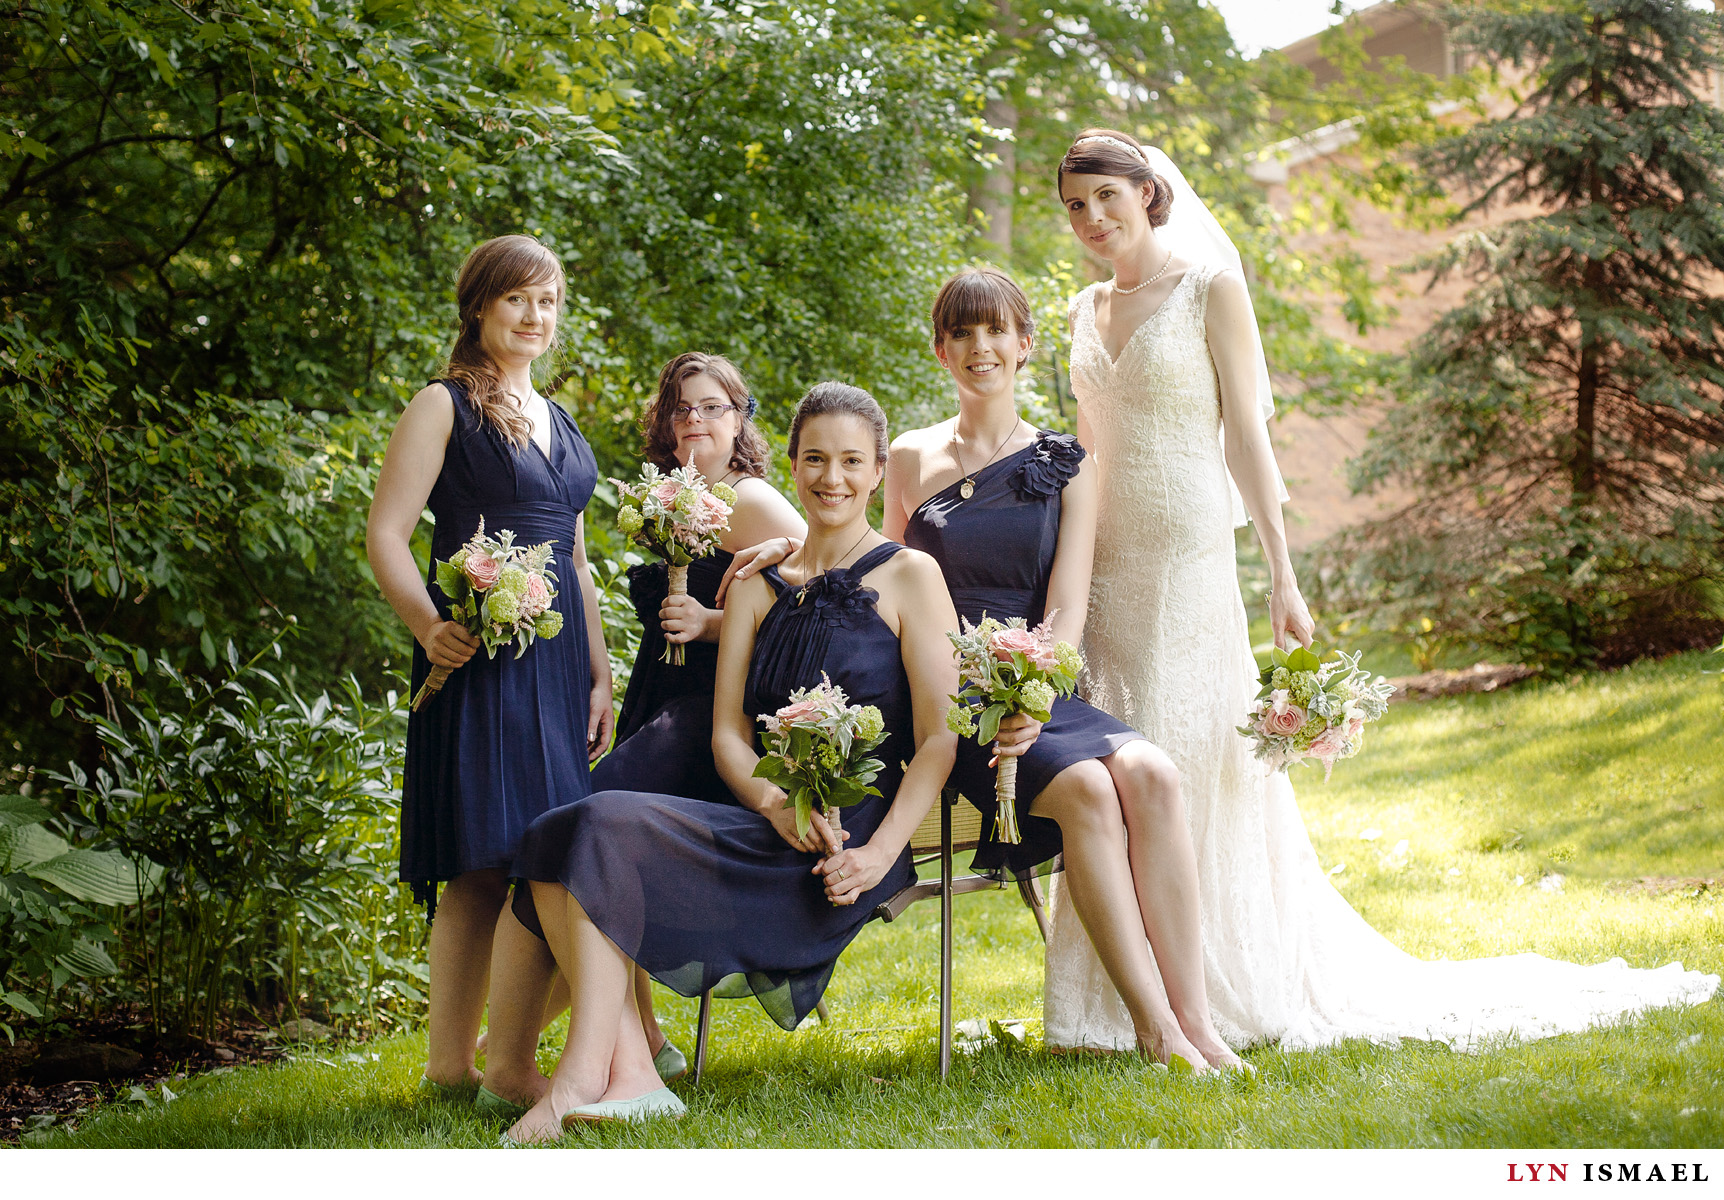 The bride and her bridesmaids before her wedding.